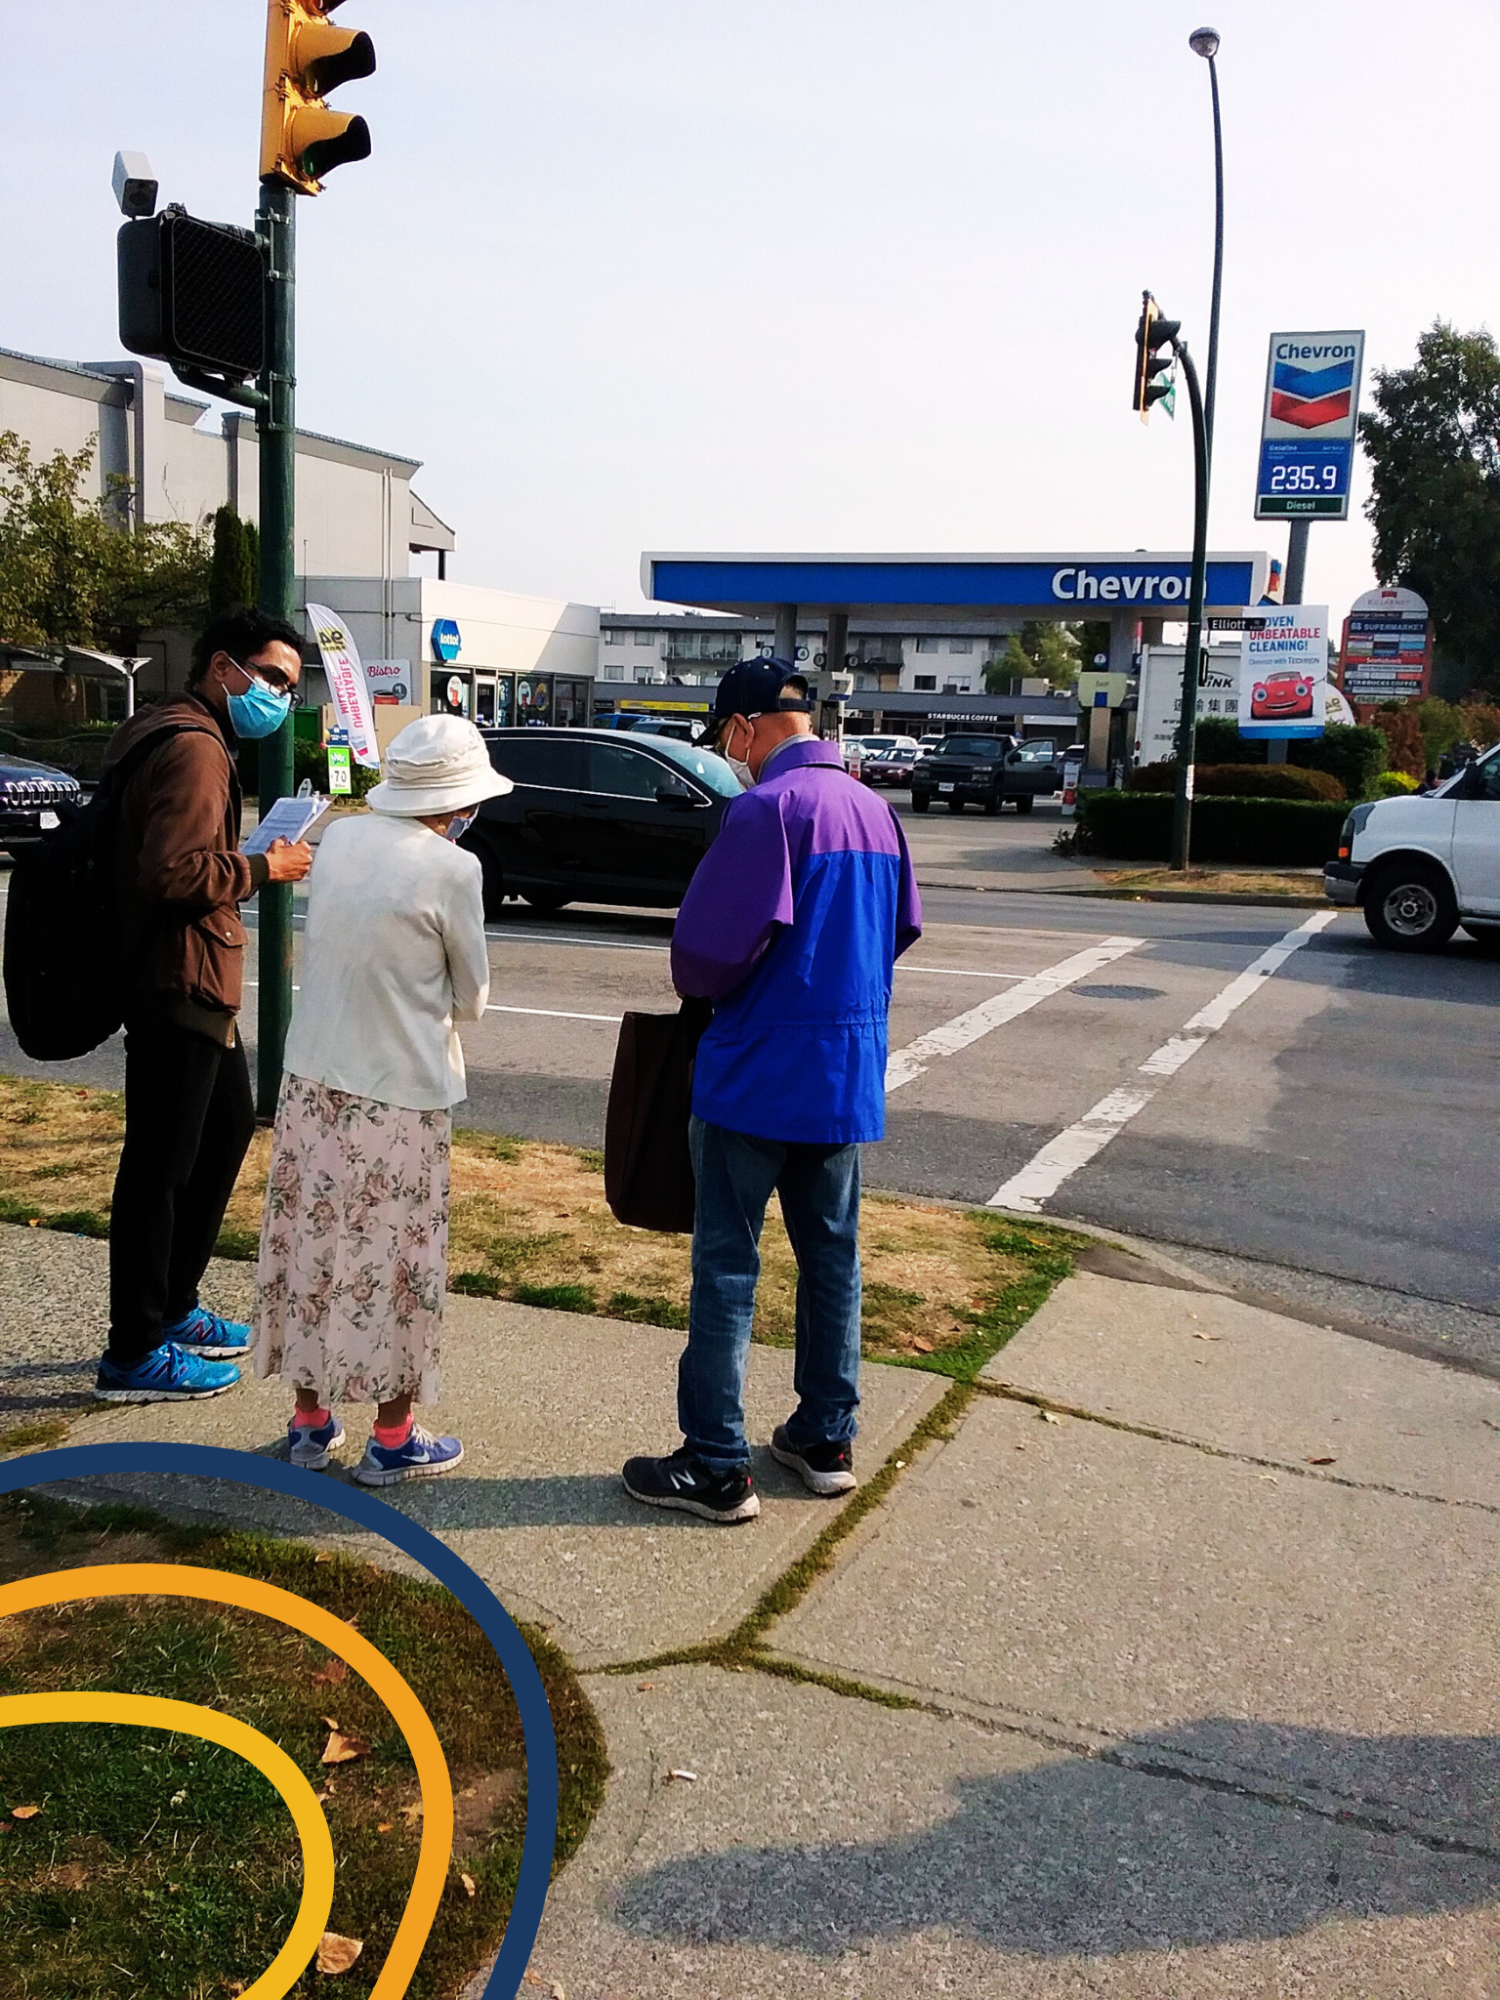 Research assistant talking to participants at the corner of an intersection